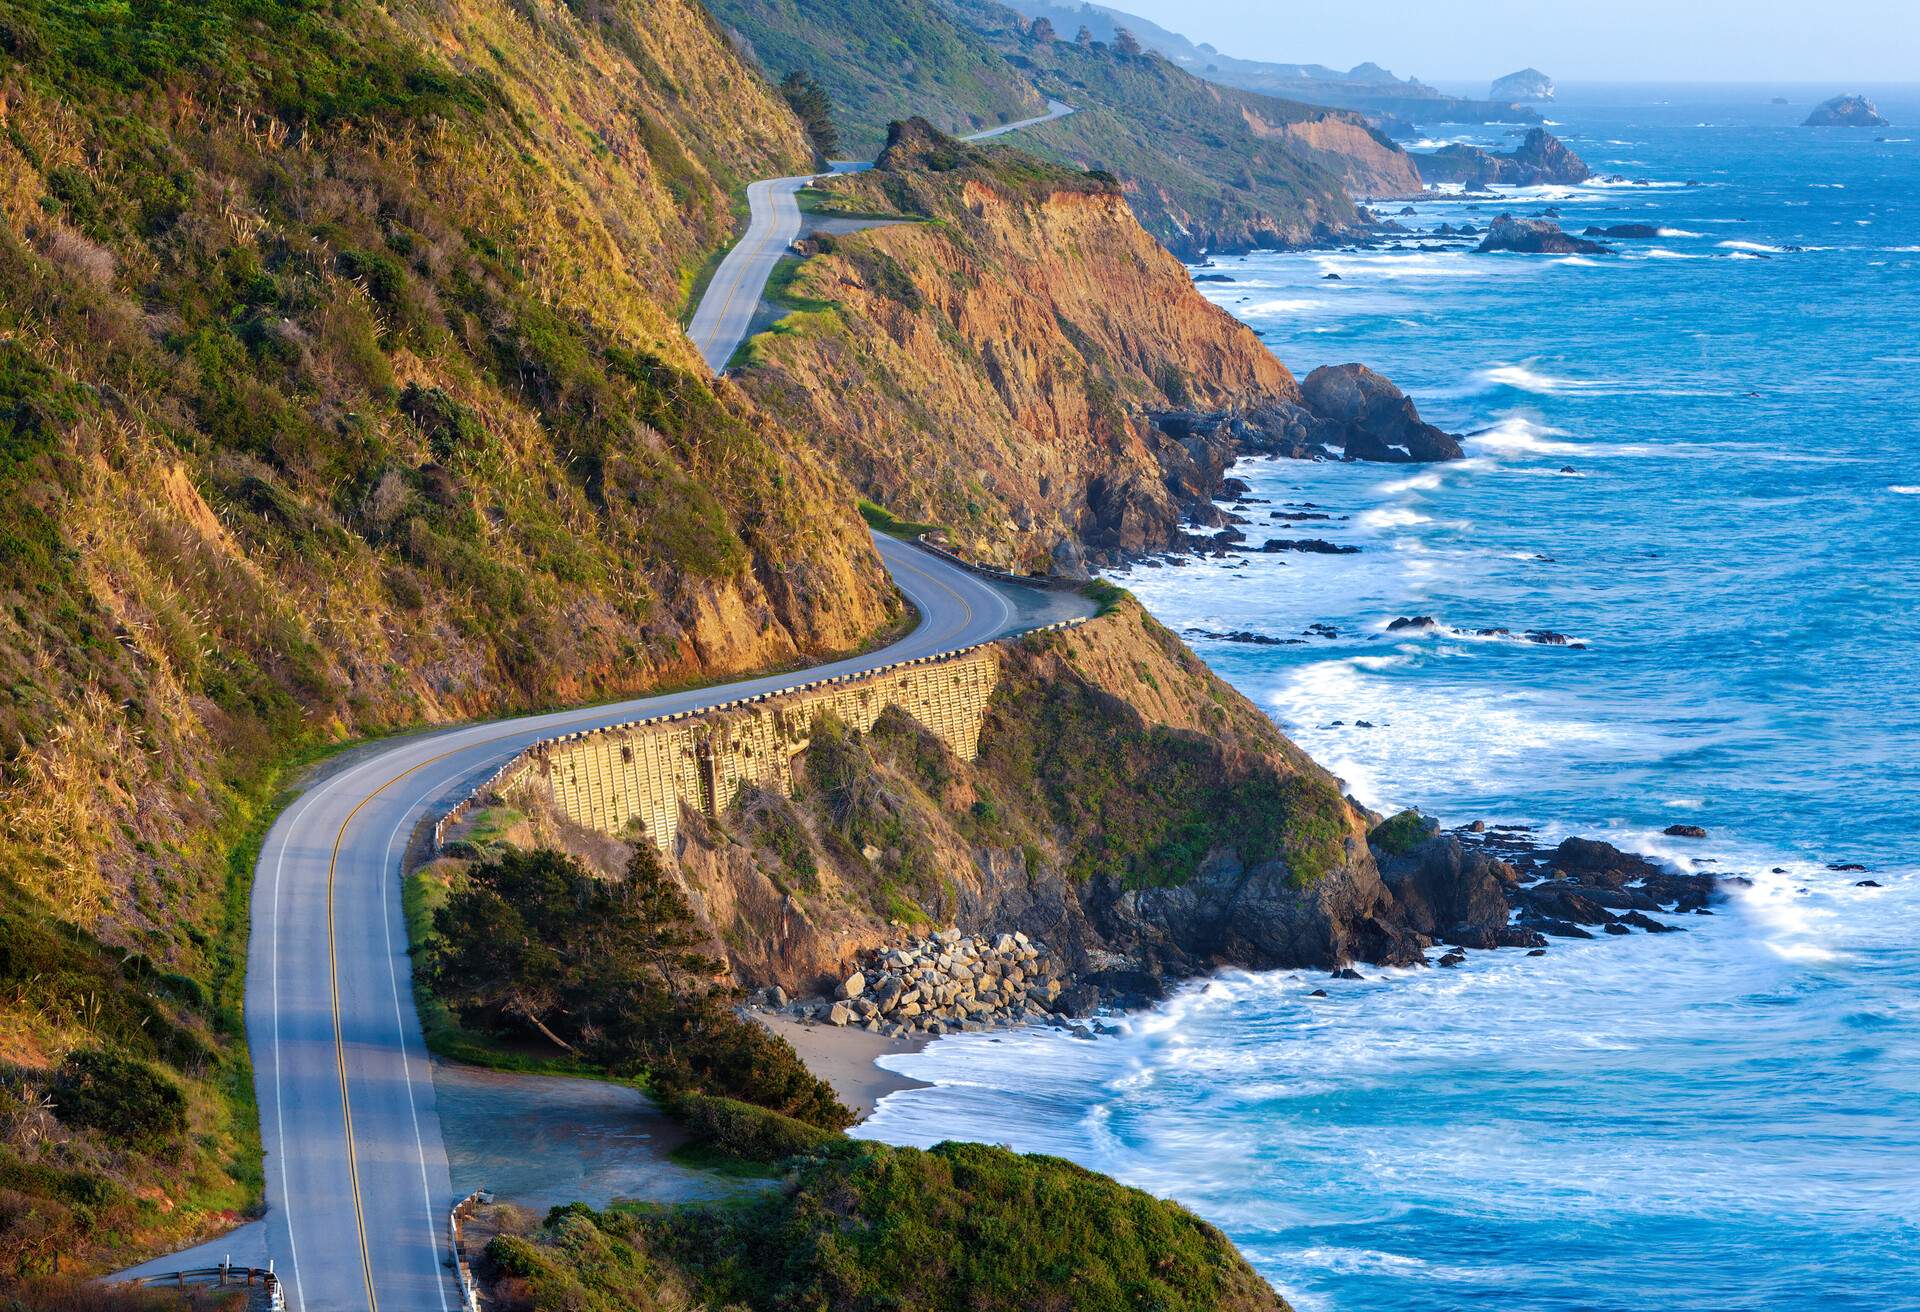 A winding road with views of a rocky beach carved into the faces of high coastal cliffs.